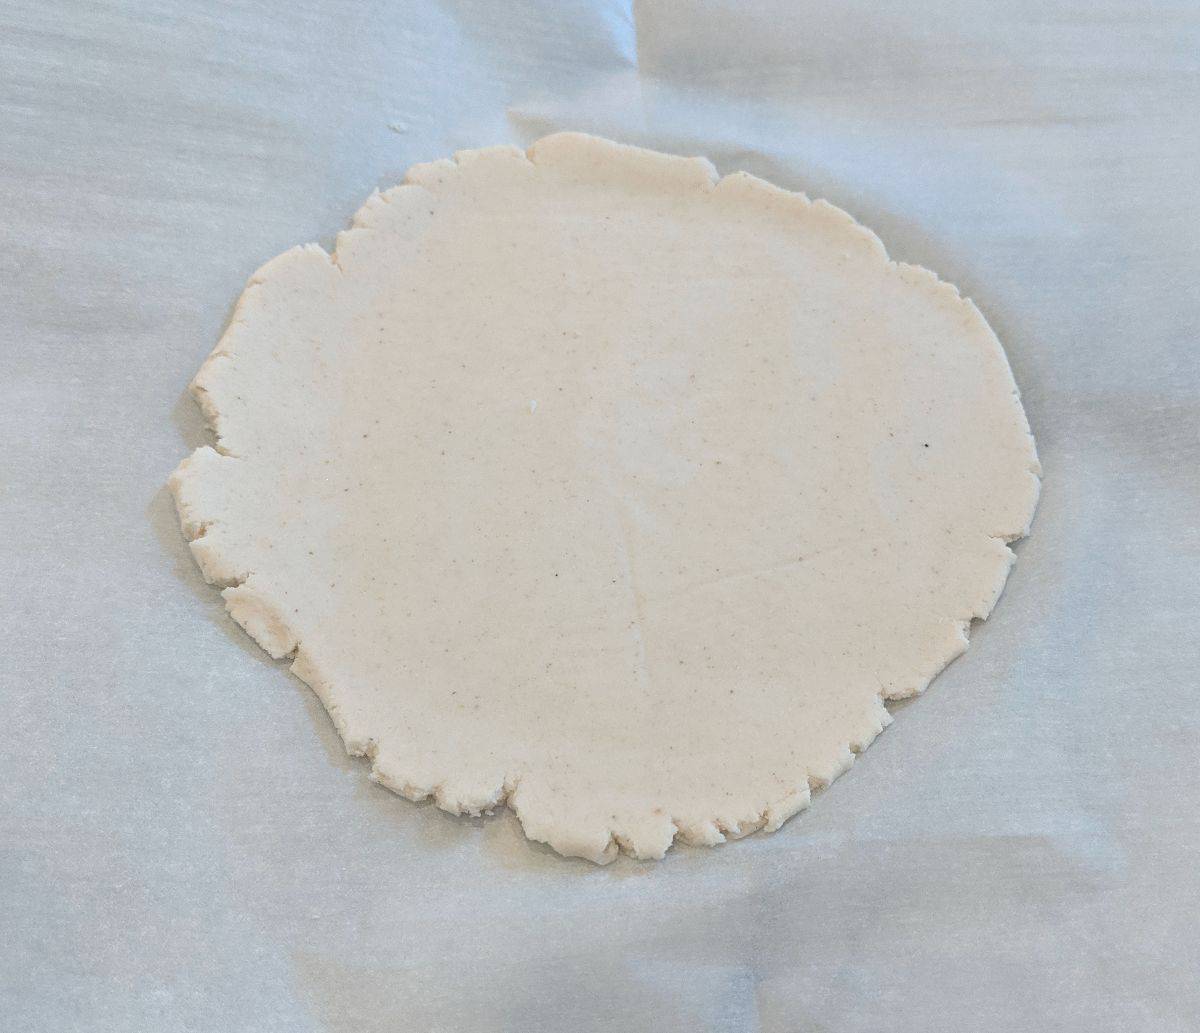 uncooked paleo tortilla on parchment paper with edges slightly cracked